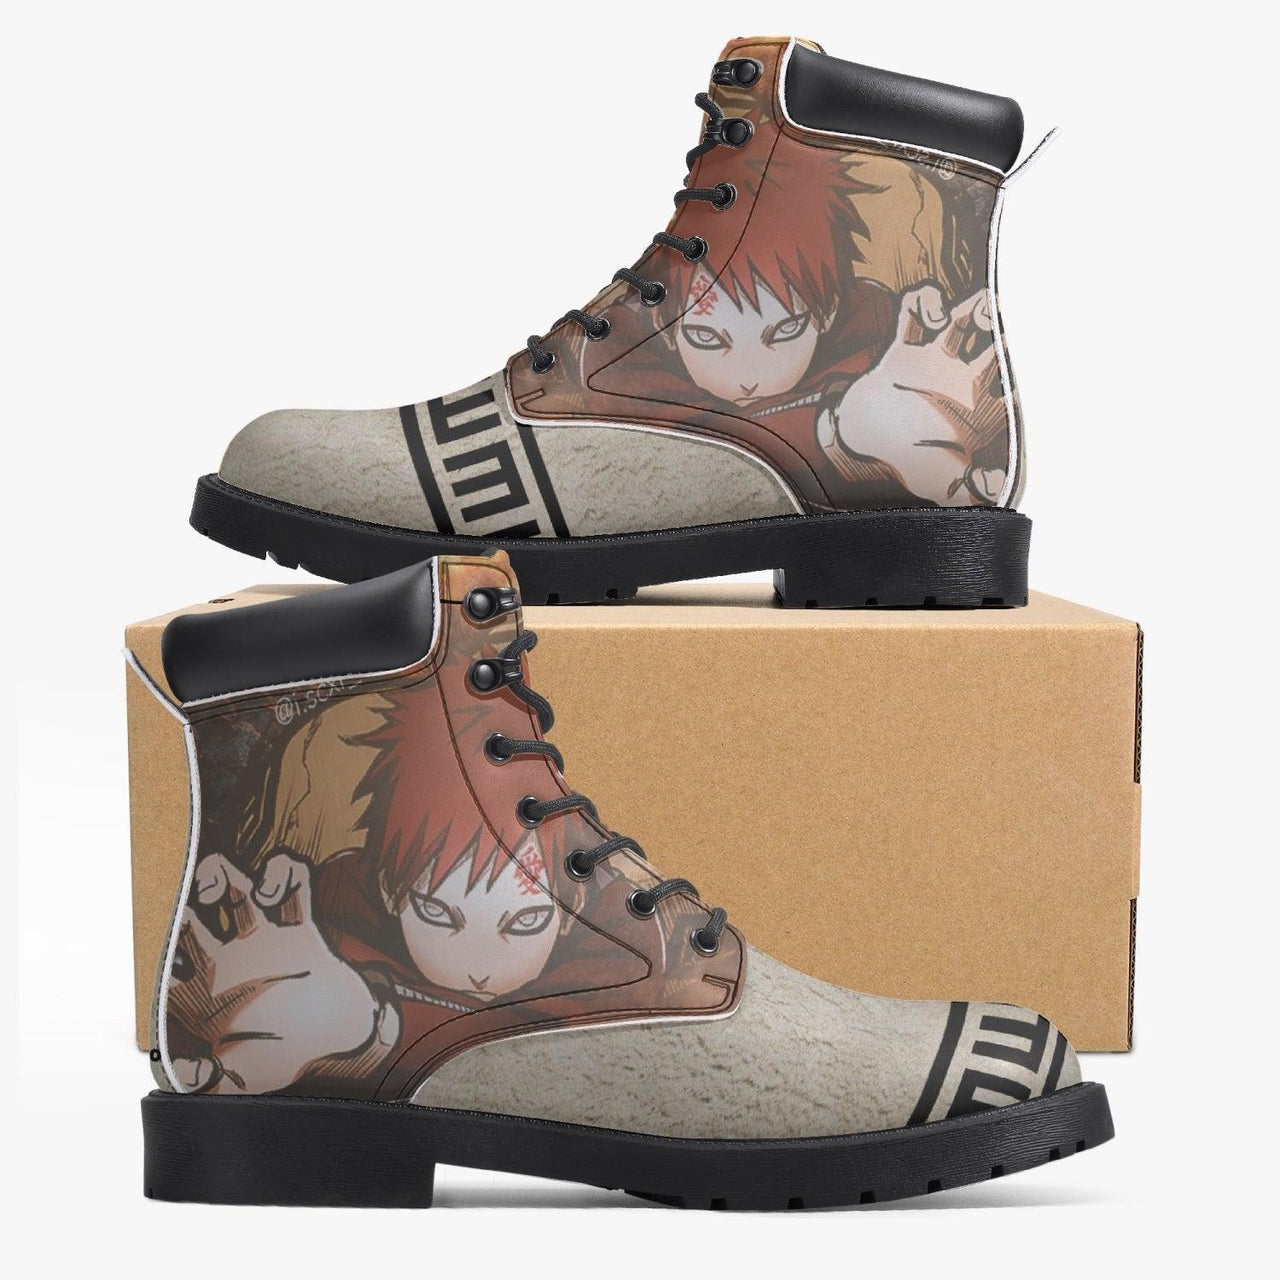 Anime brown boots 36 by extracsflam on DeviantArt